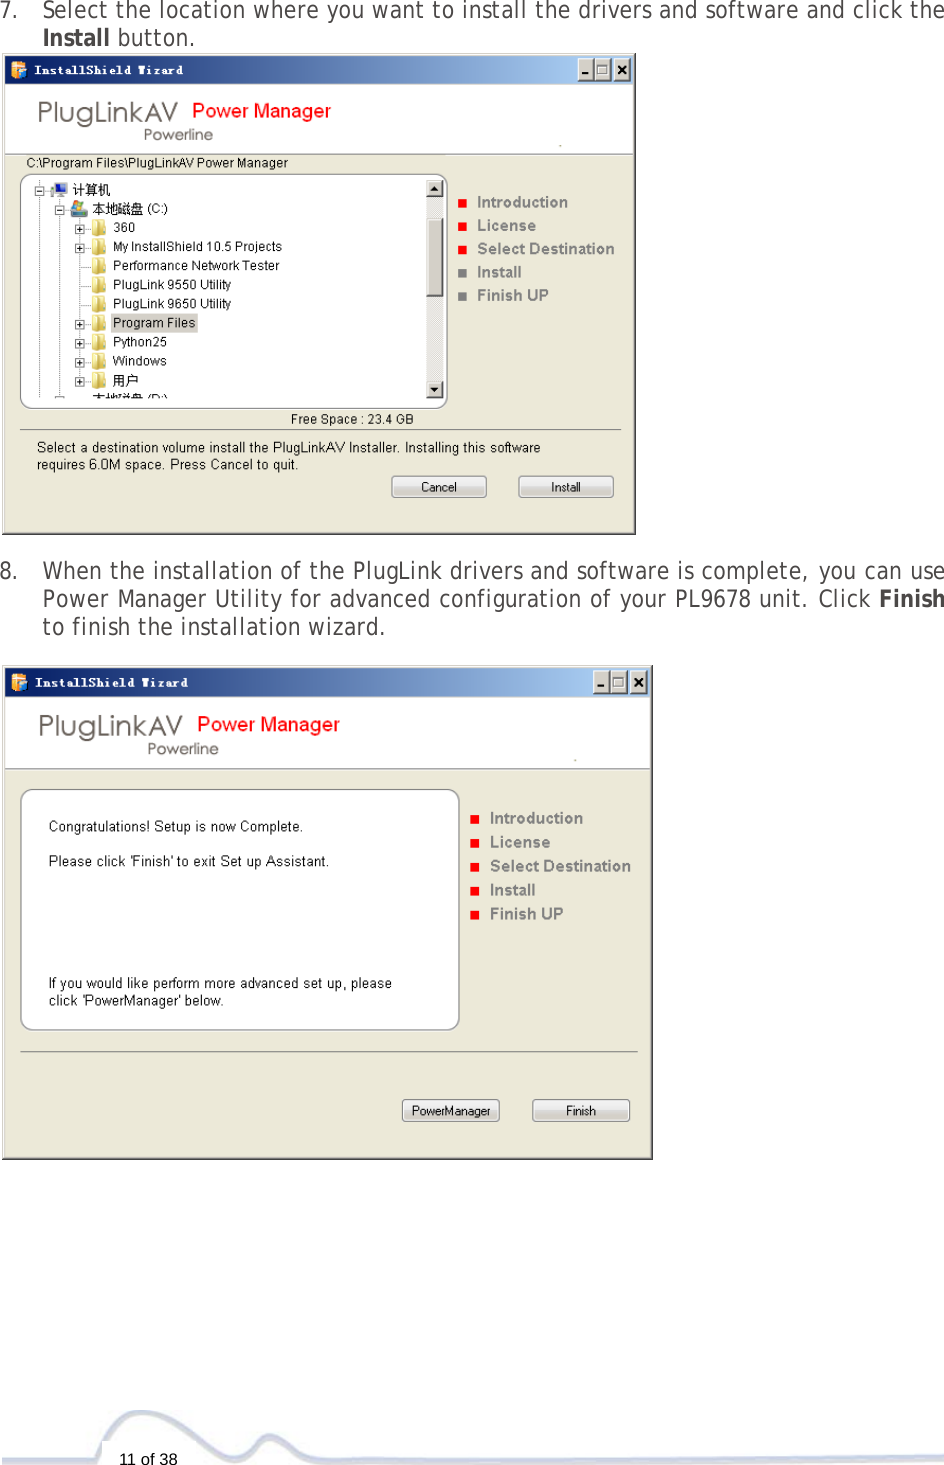  11 of 38  7. Select the location where you want to install the drivers and software and click the Install button.   8. When the installation of the PlugLink drivers and software is complete, you can use Power Manager Utility for advanced configuration of your PL9678 unit. Click Finish to finish the installation wizard.   